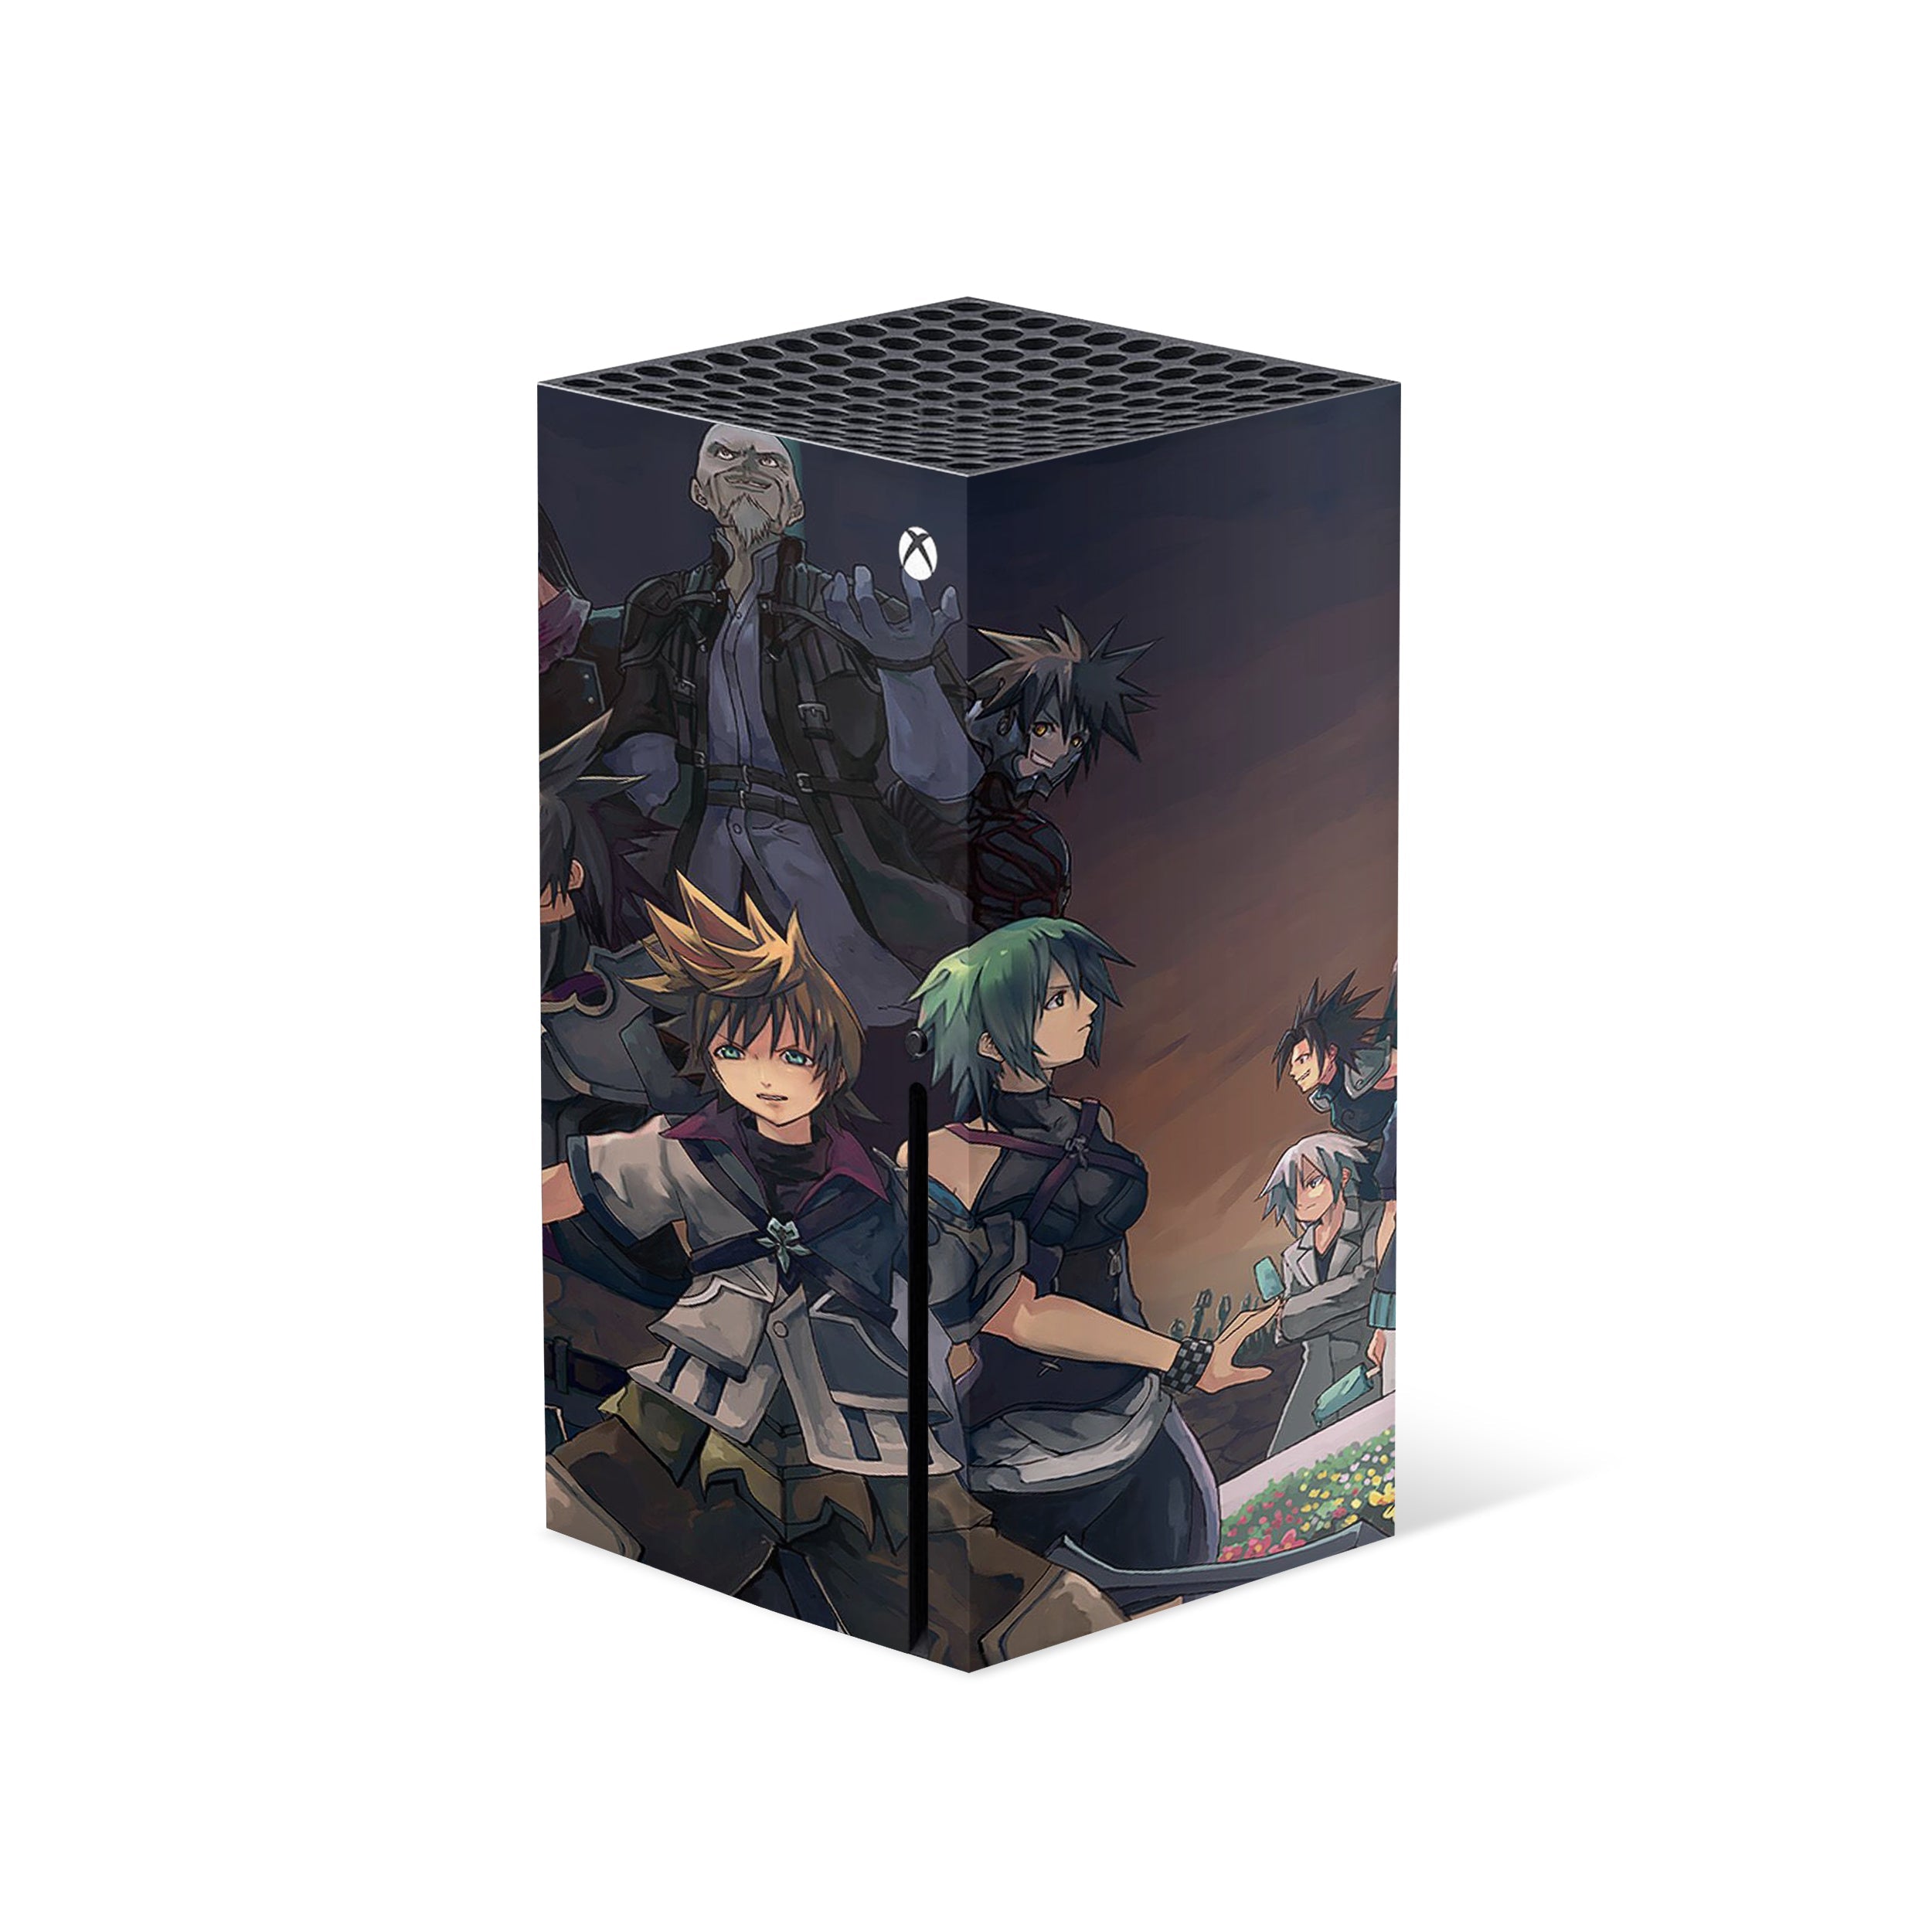 A video game skin featuring a Kingdom Hearts design for the Xbox Series X.